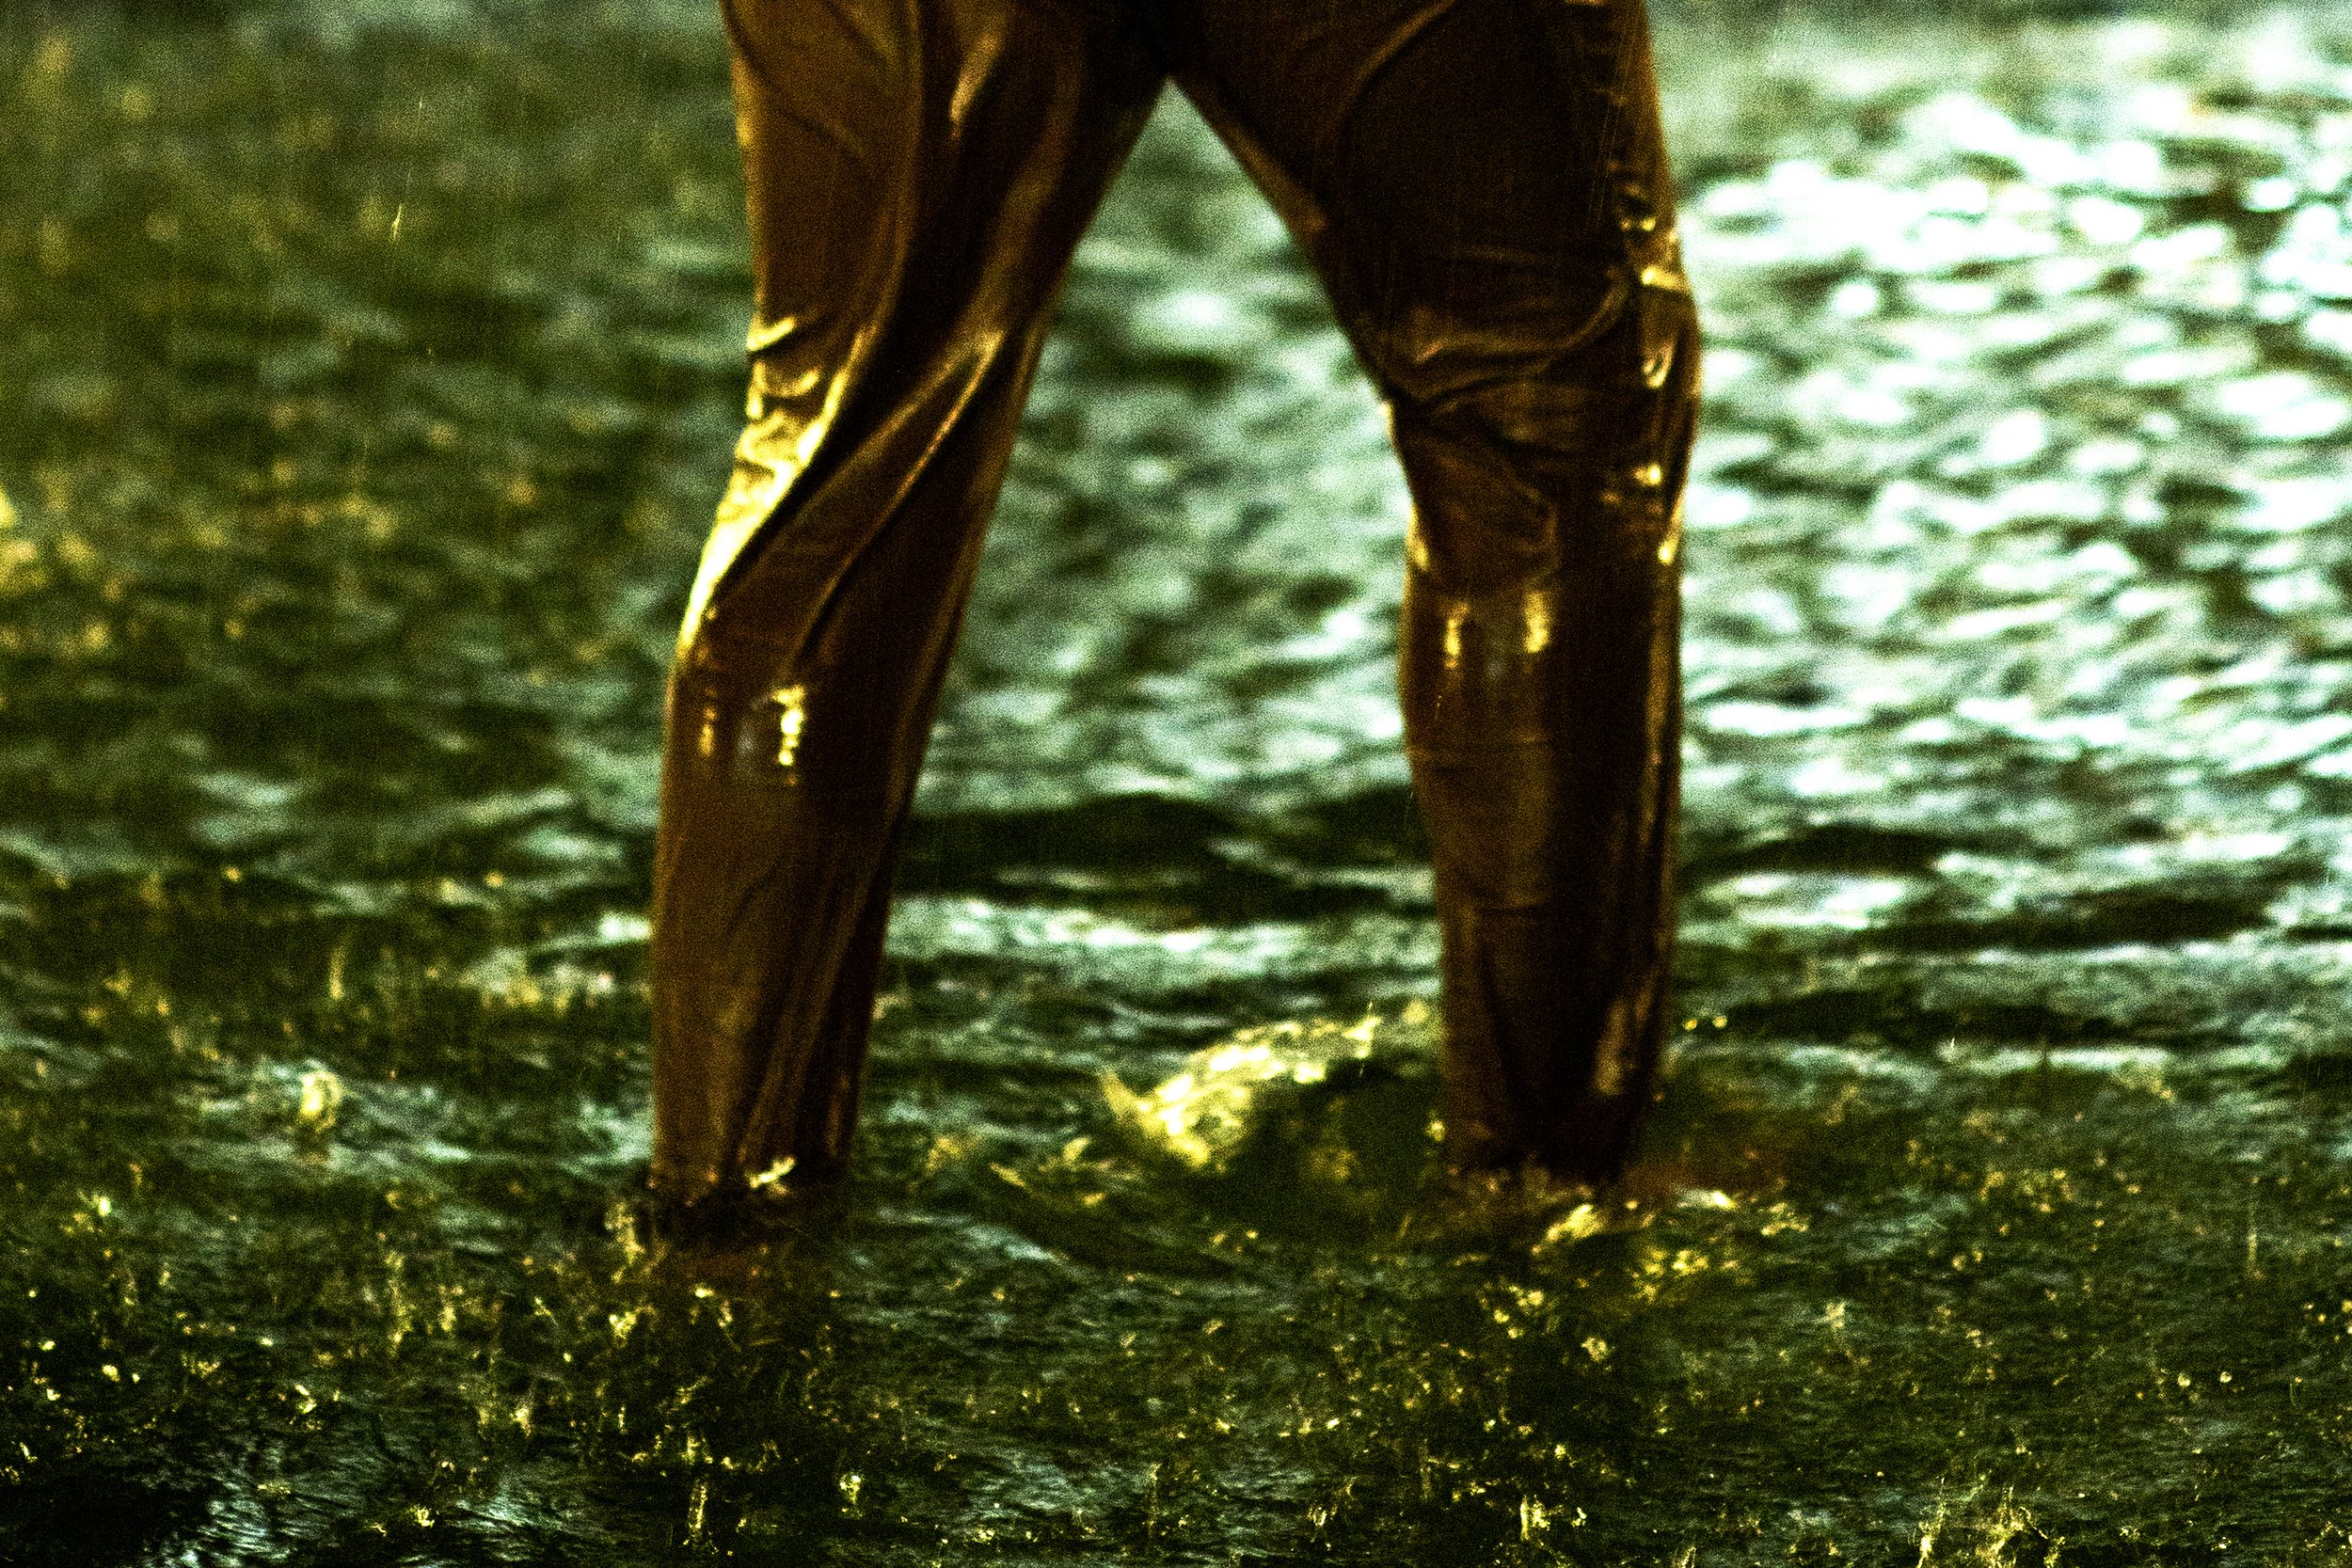 Golden Pants in Water Washington Square Park NYC 2.jpg